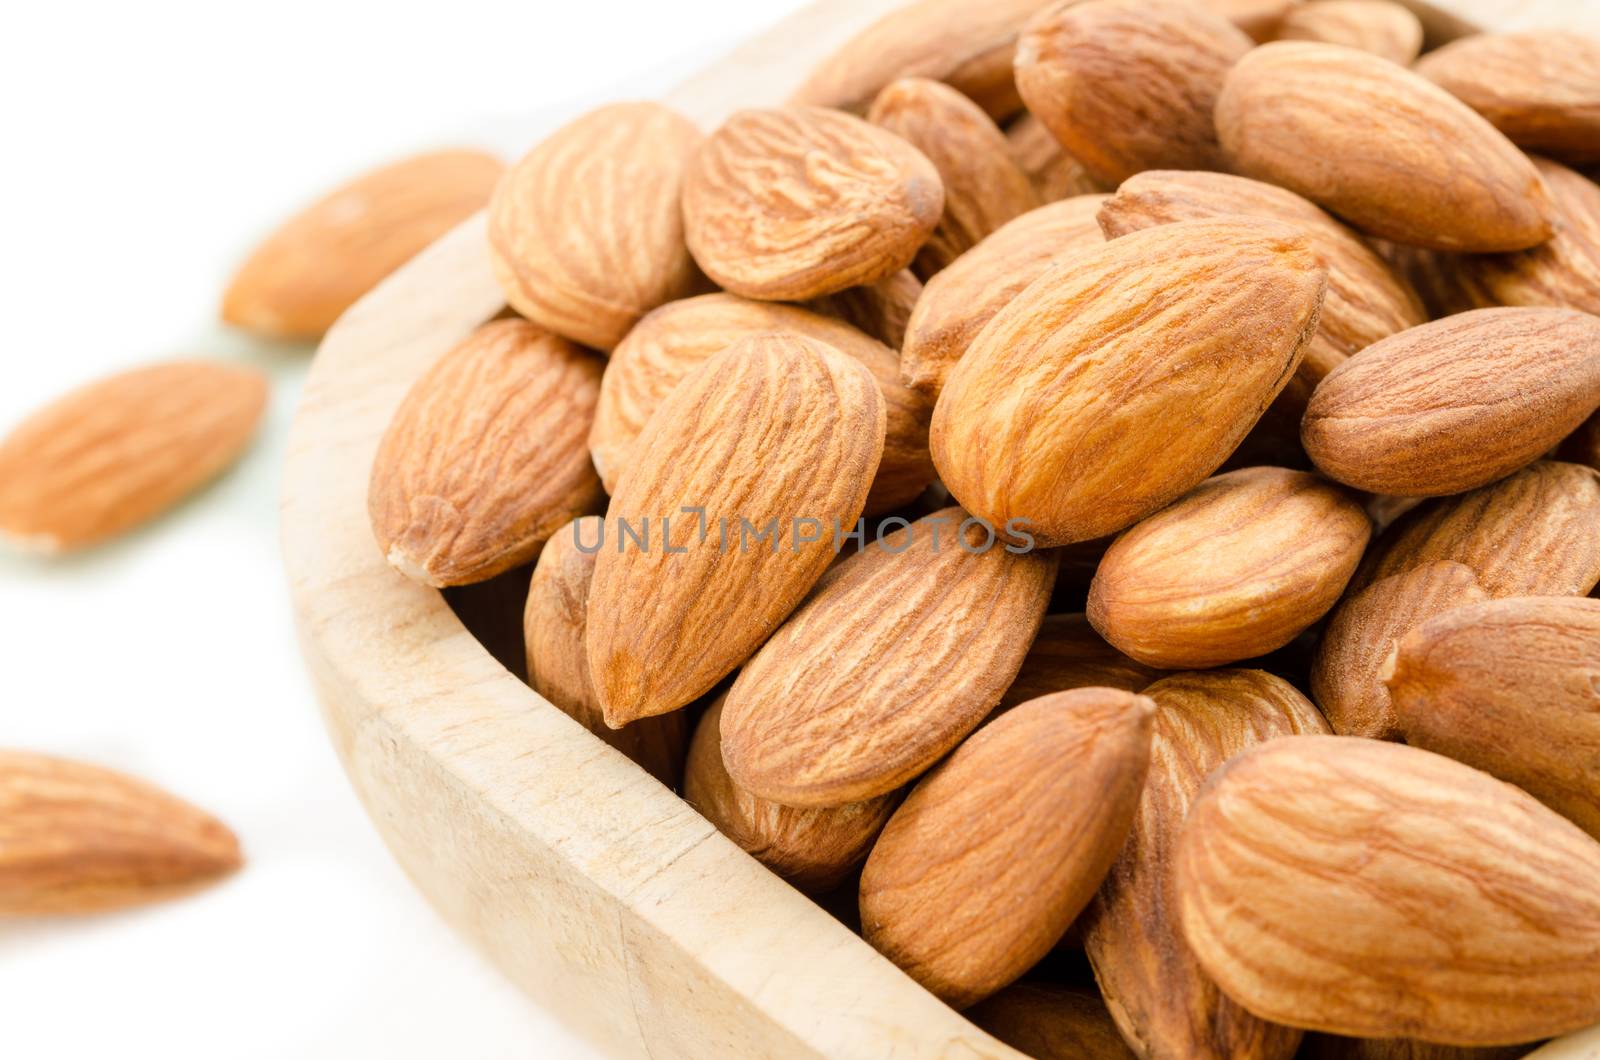 Almonds in wooden bowl on white background.